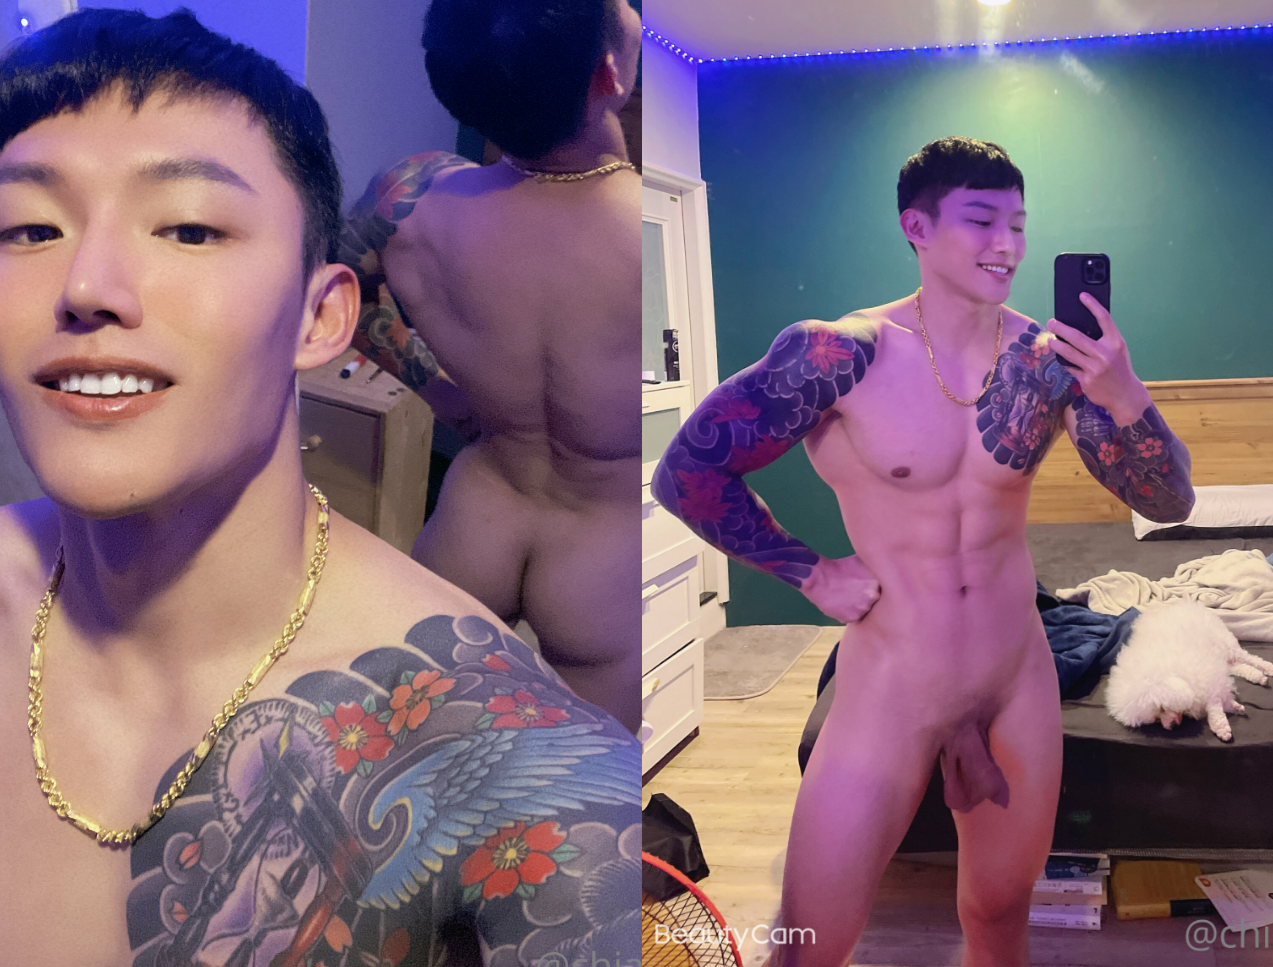 Chiang_gogo onlyfans